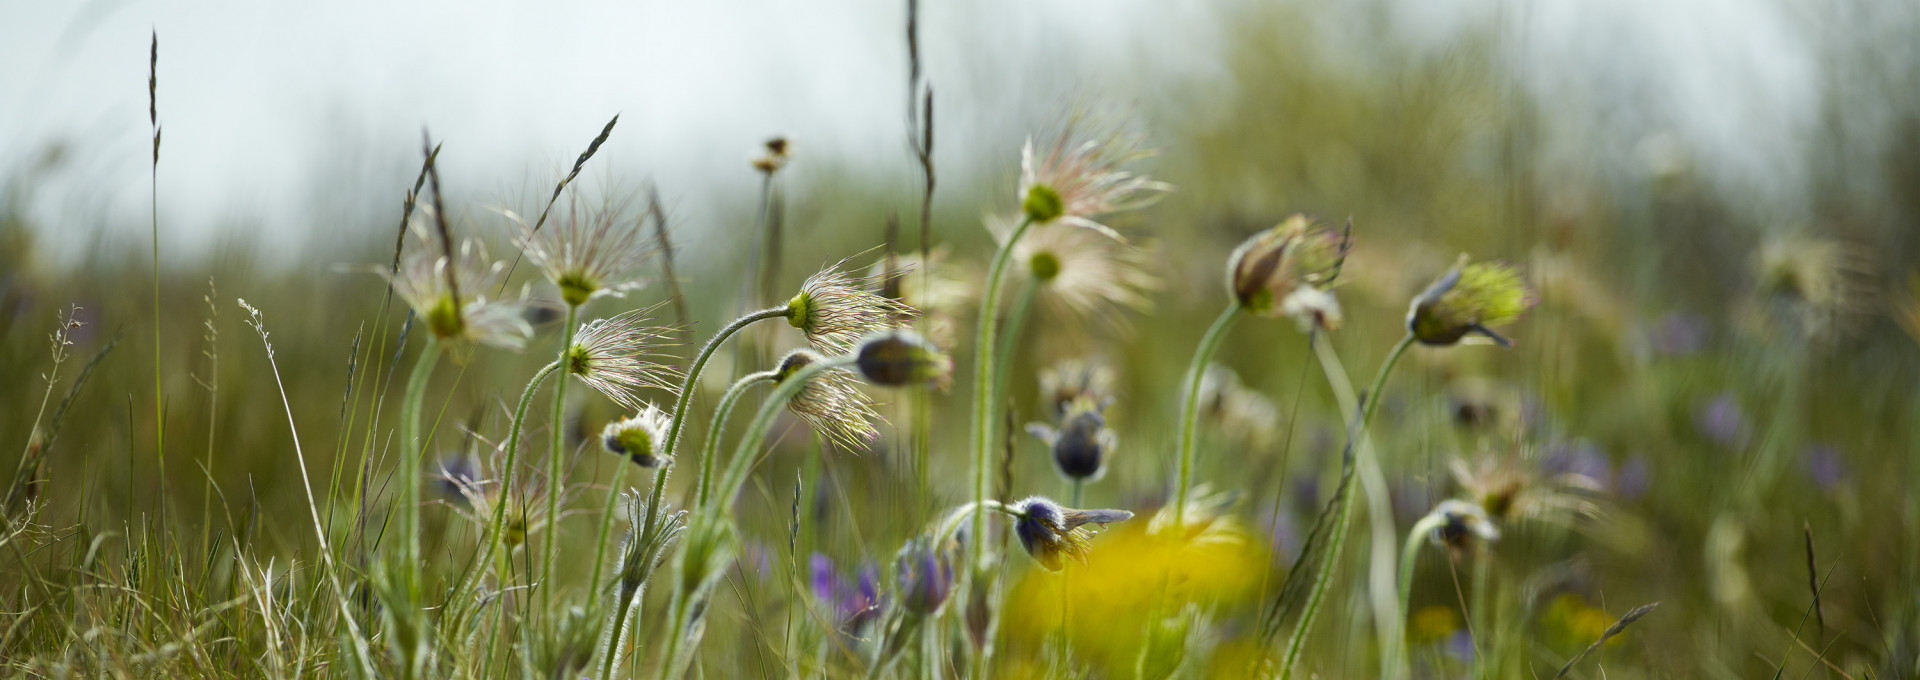 Pasque flower on a field